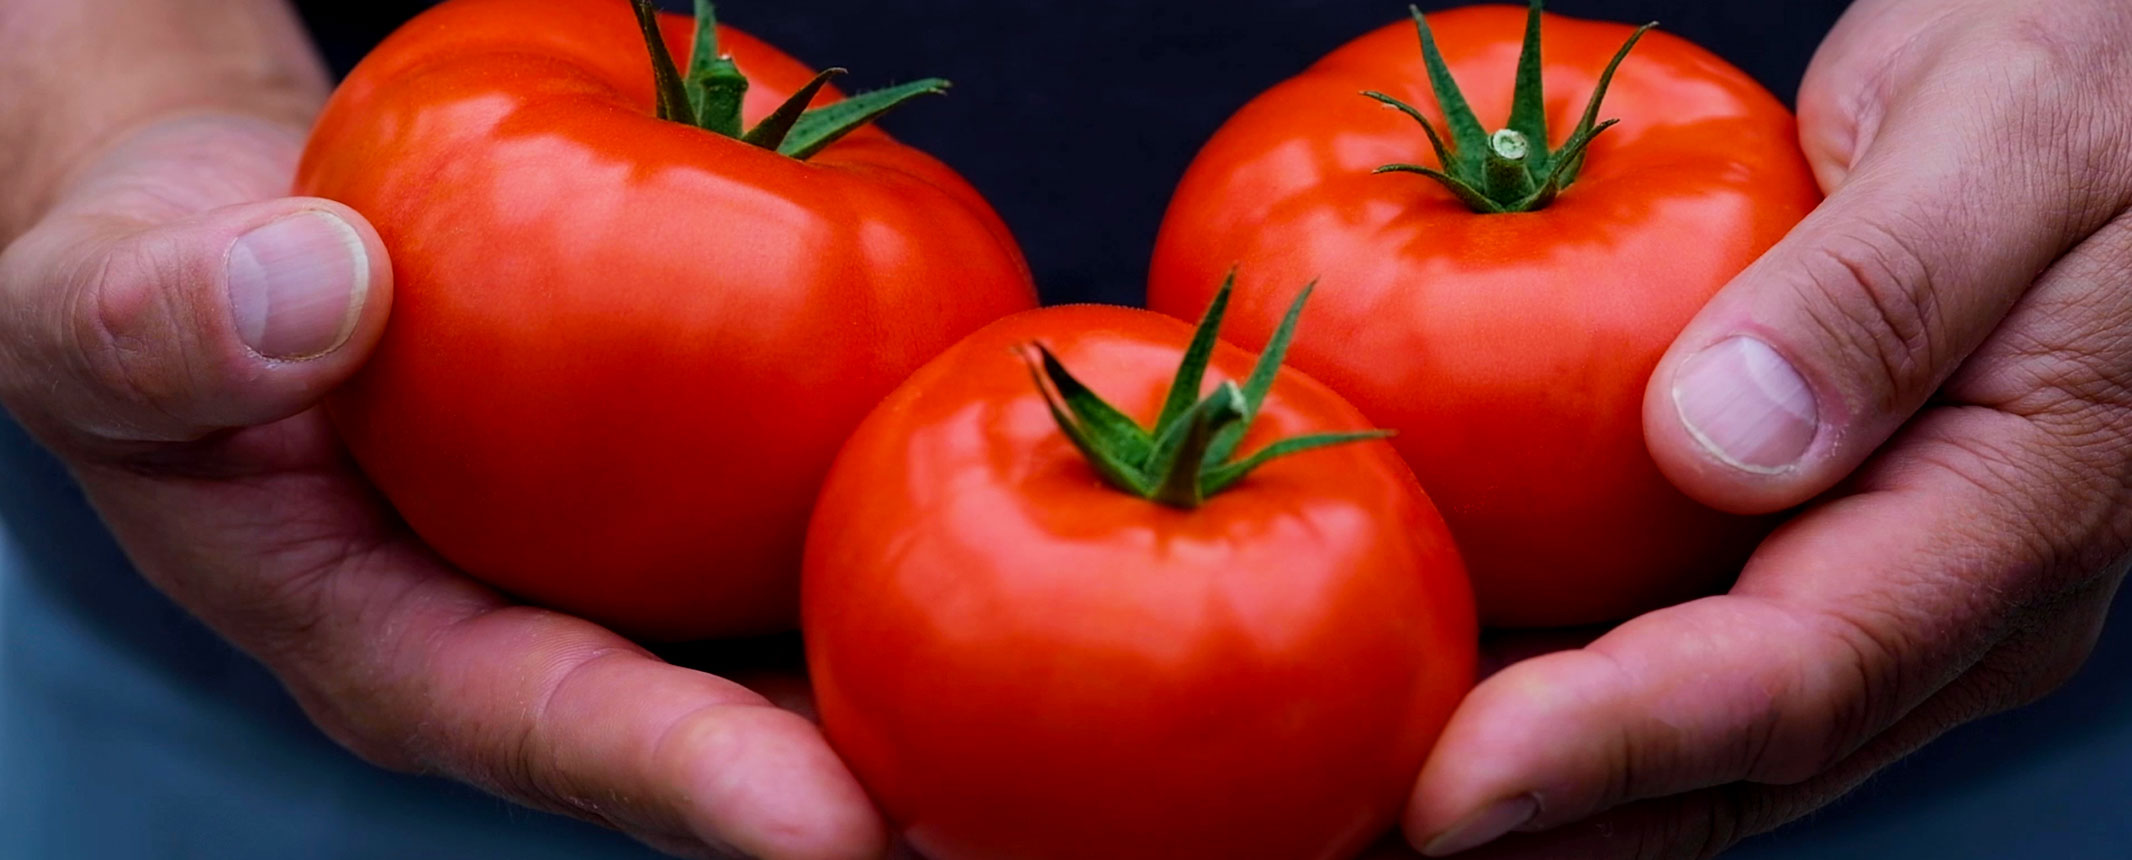 Hands holding three large red tomatoes